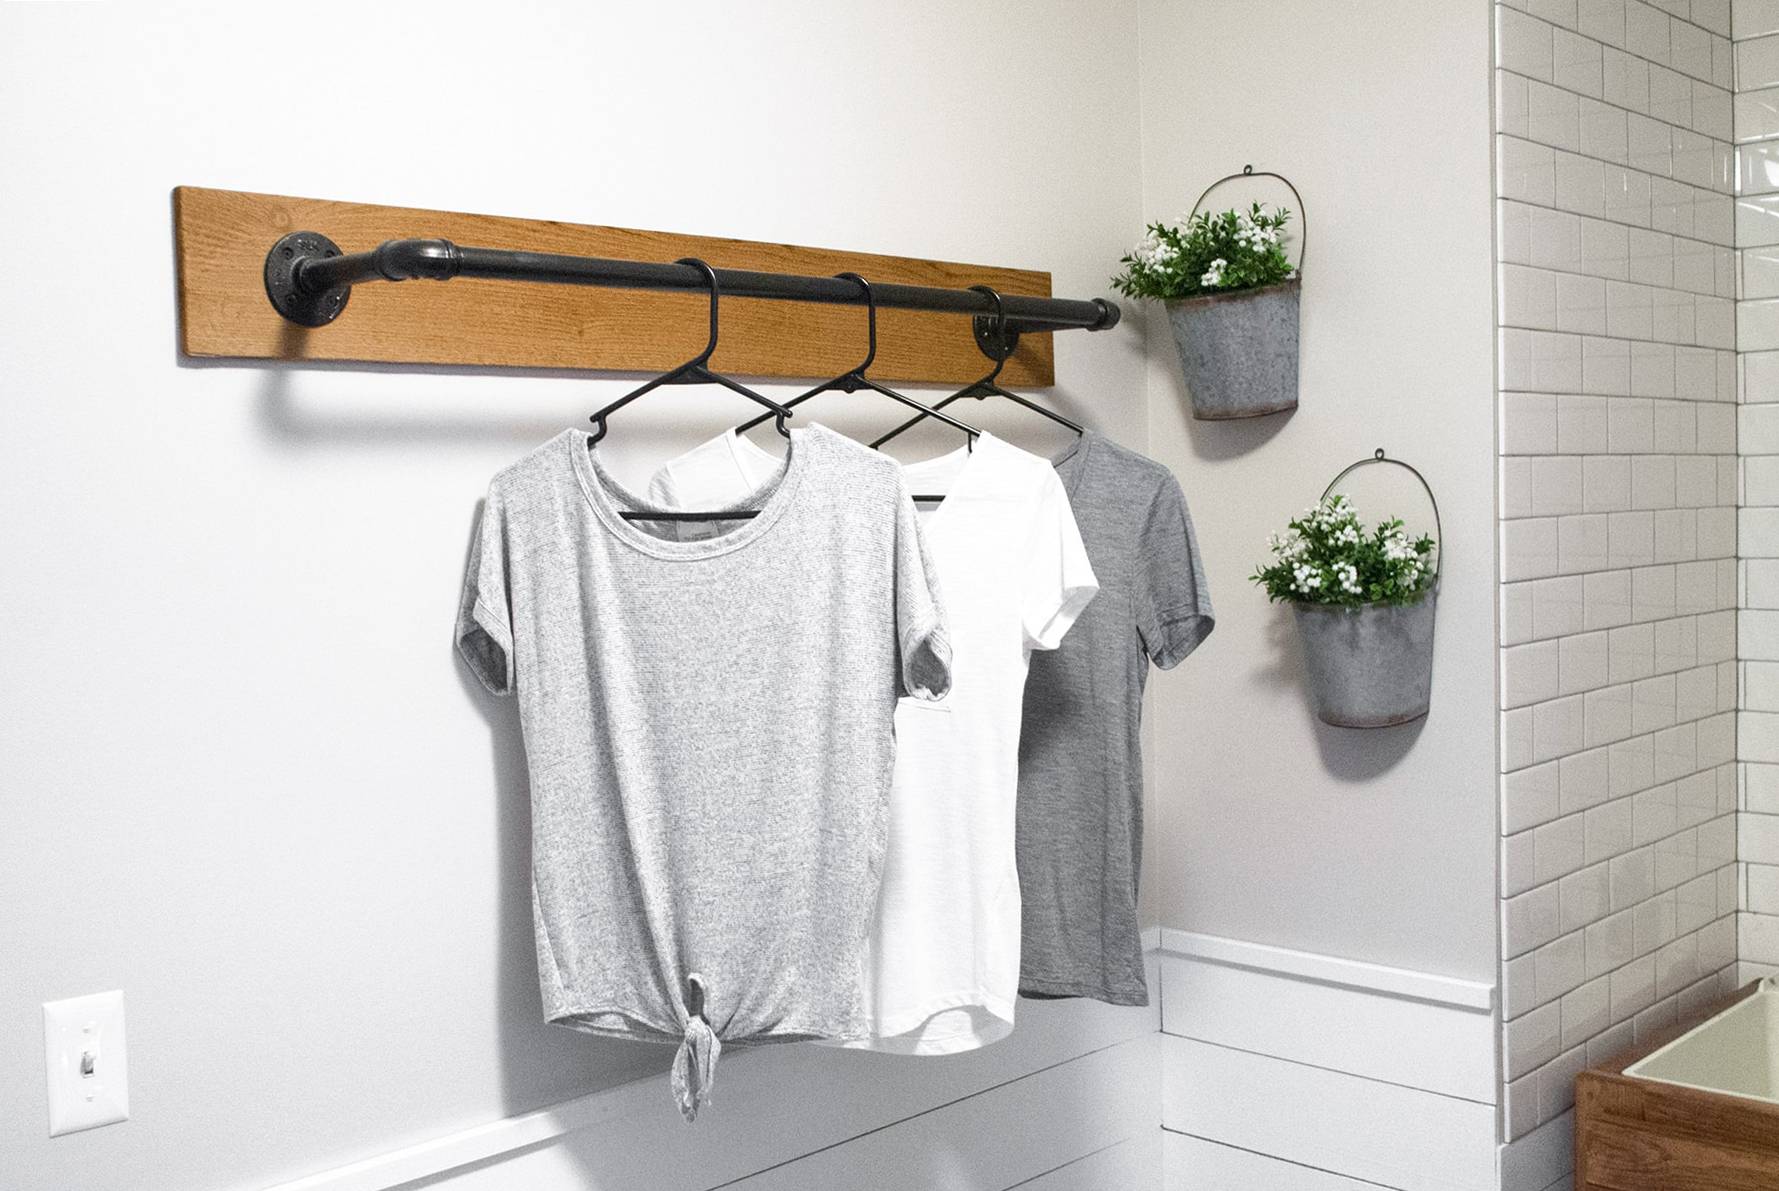 Coat Rack Ideas That Will Enhance Your Home’s Functionality and Style